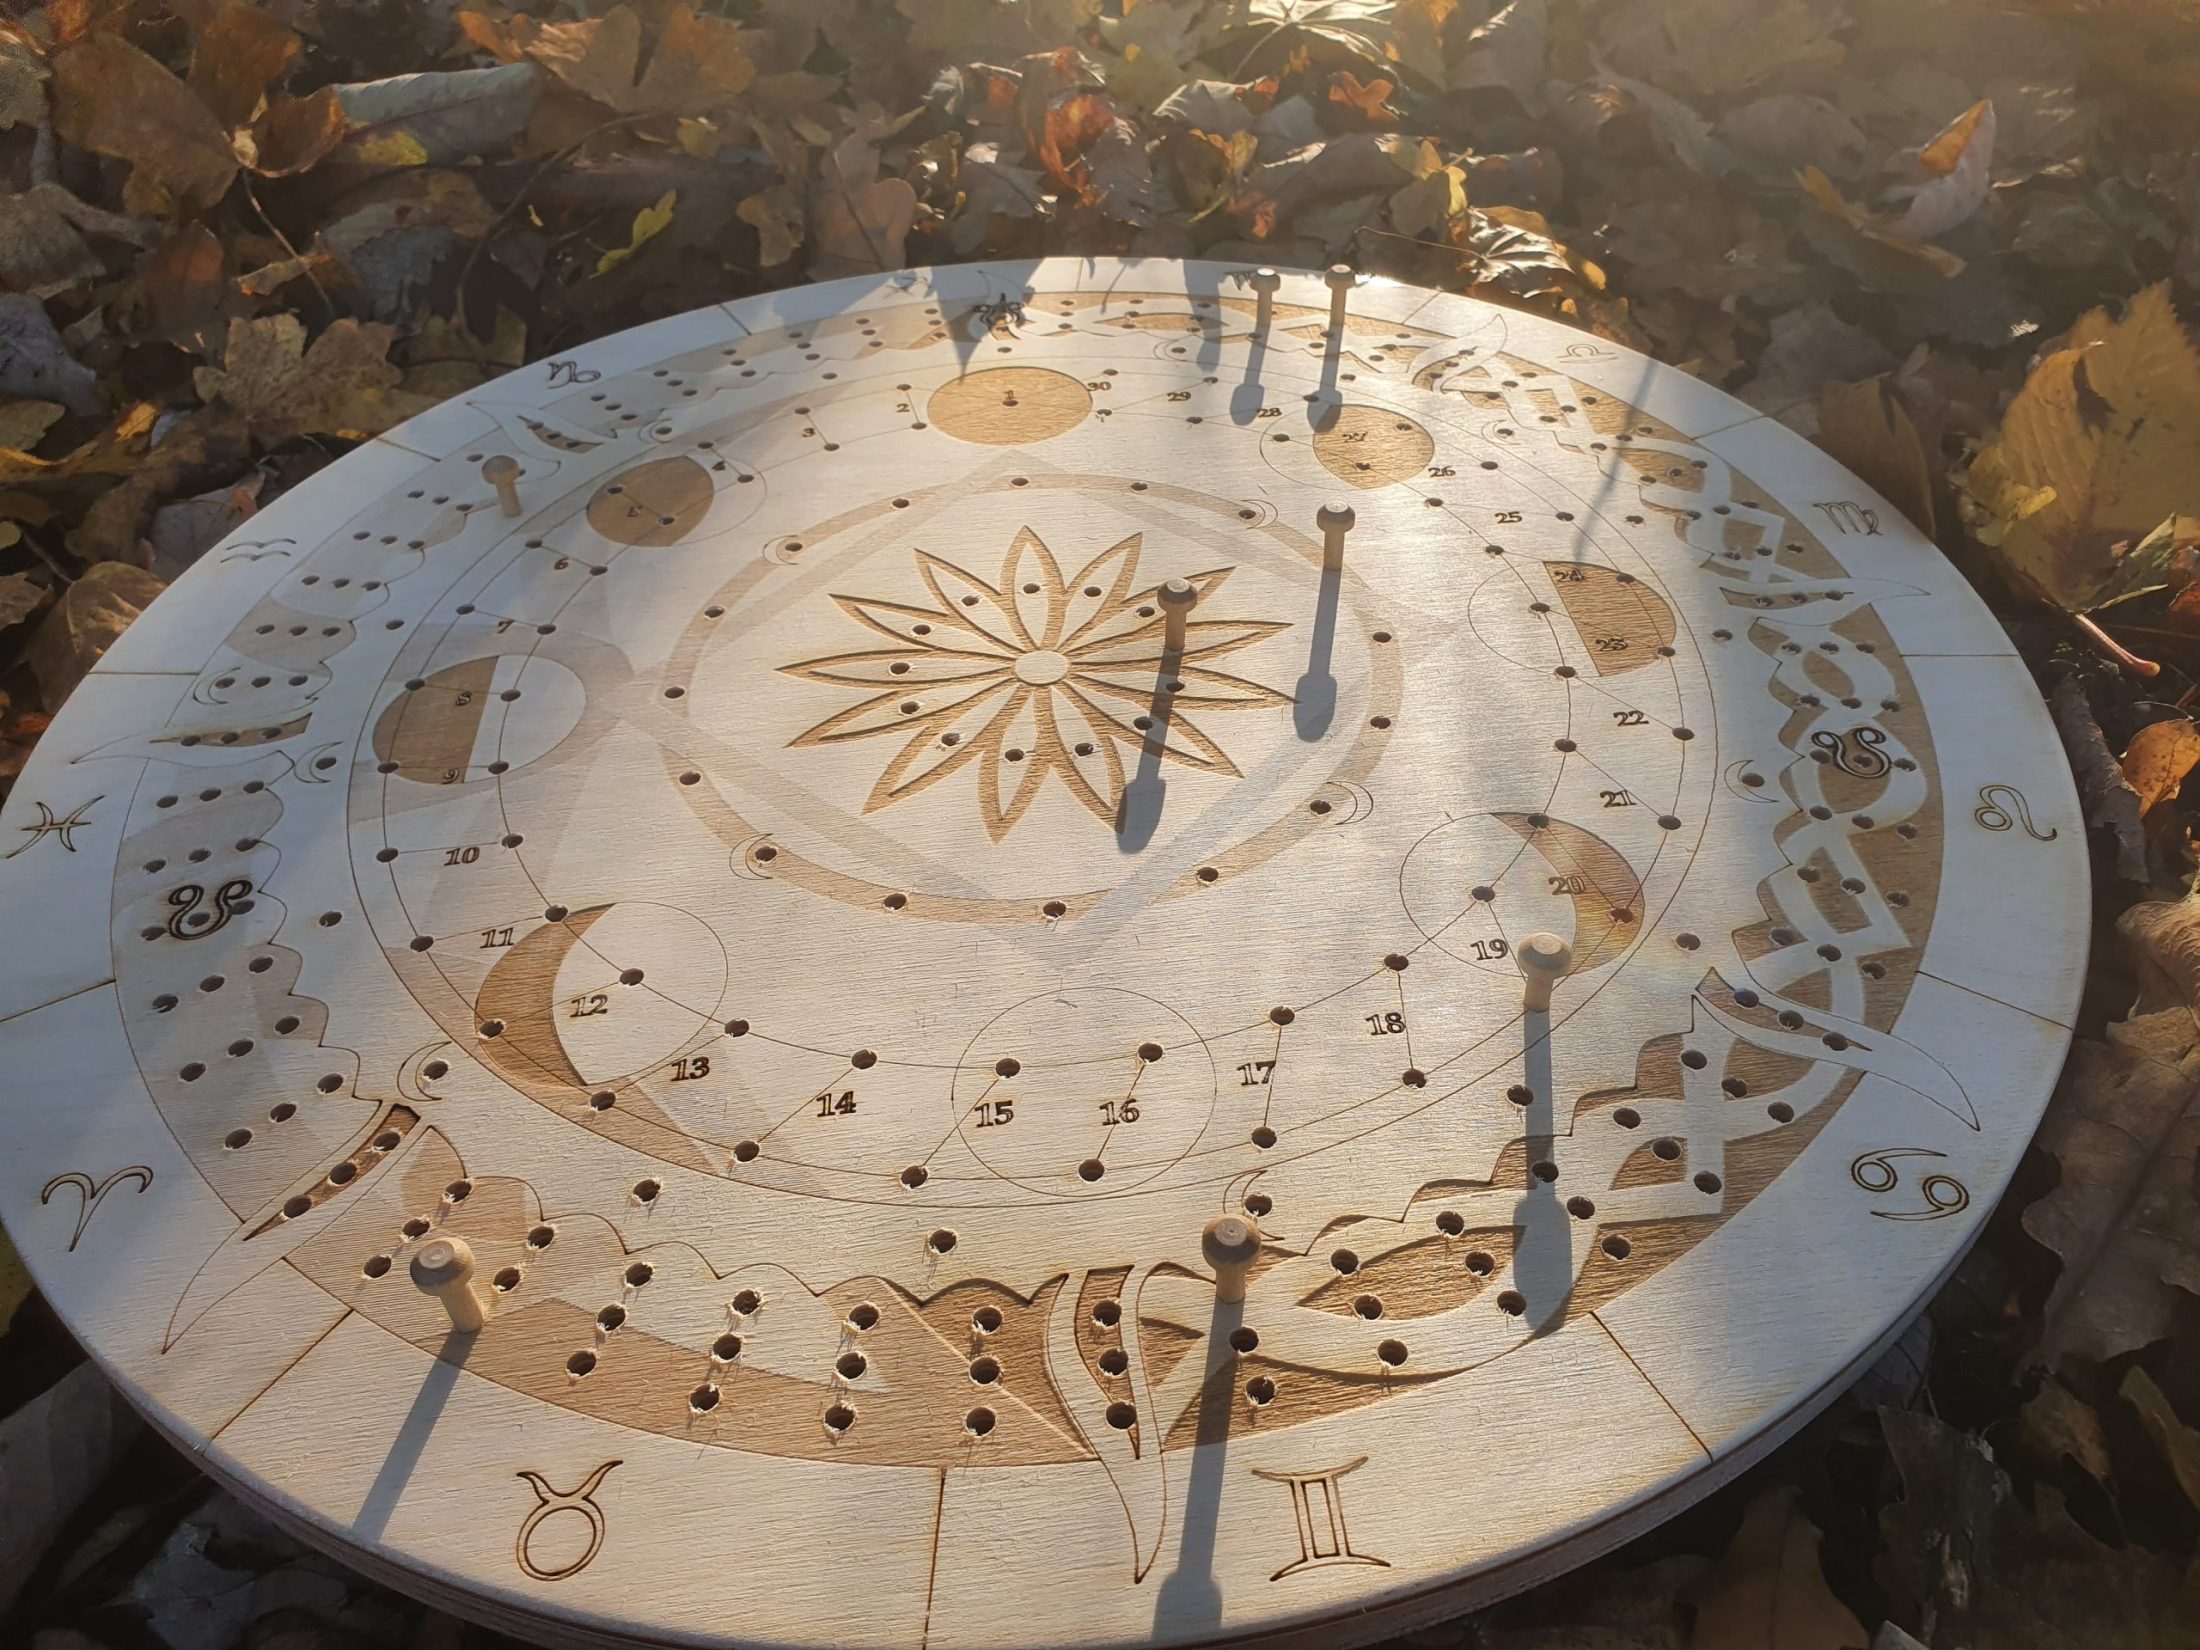 The Druidcraft Calendar out in the sun light among autumn leaves